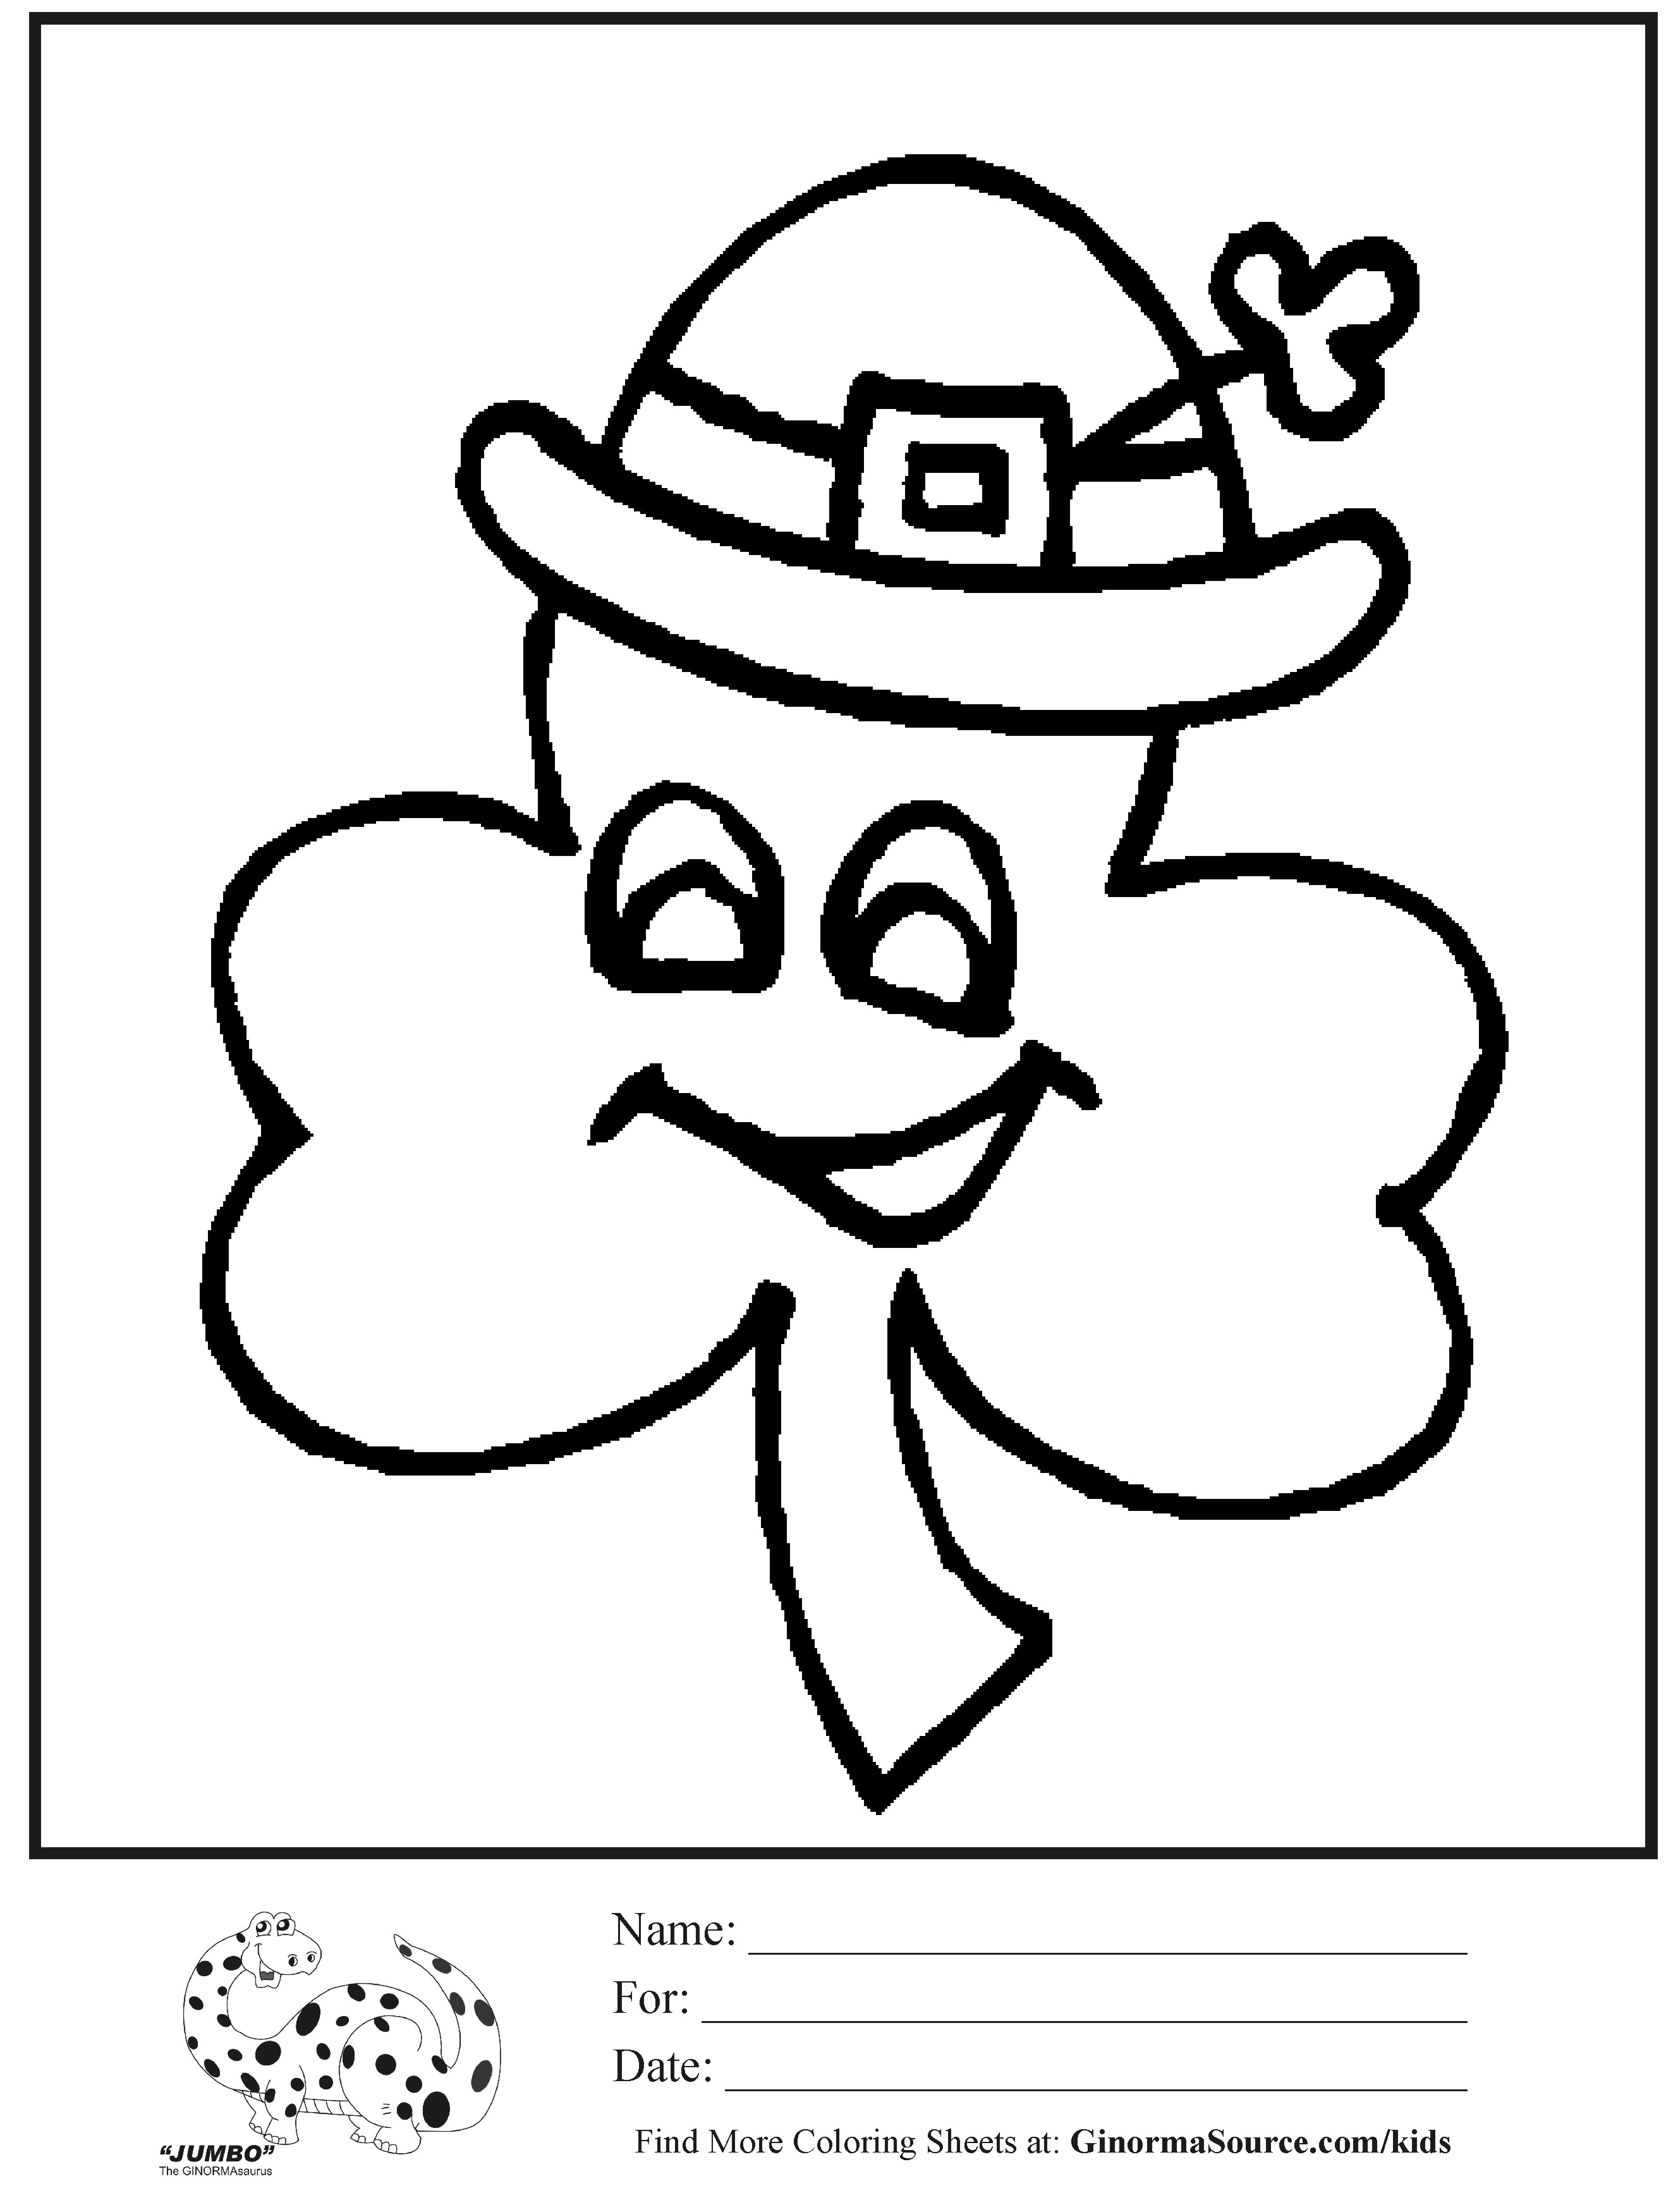 Drawing a Leprechaun · Art Projects for Kids